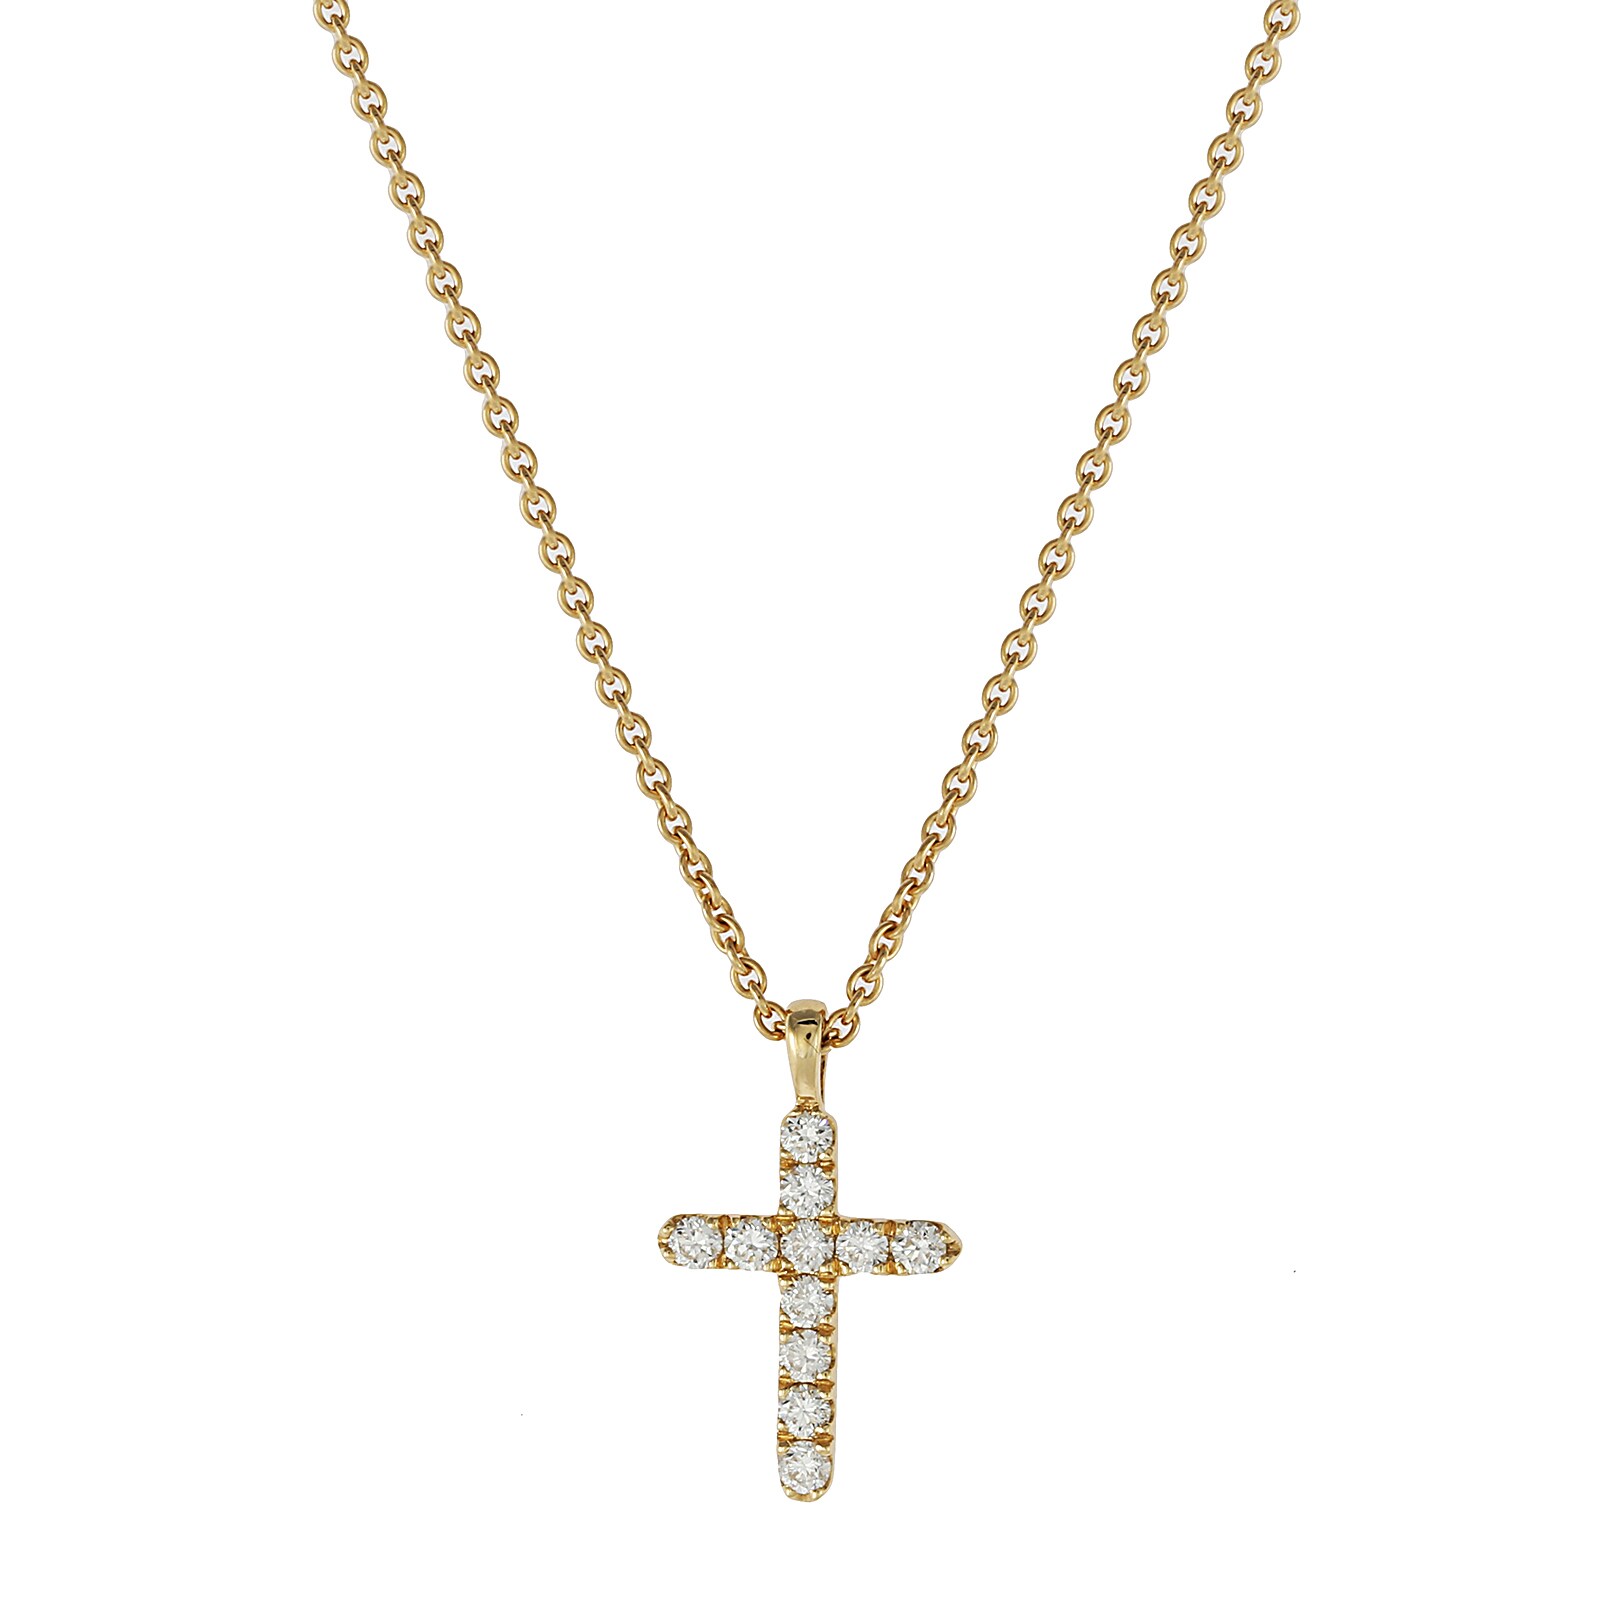 Tiffany 18ct Gold Cross Necklace - The Chelsea Bijouterie